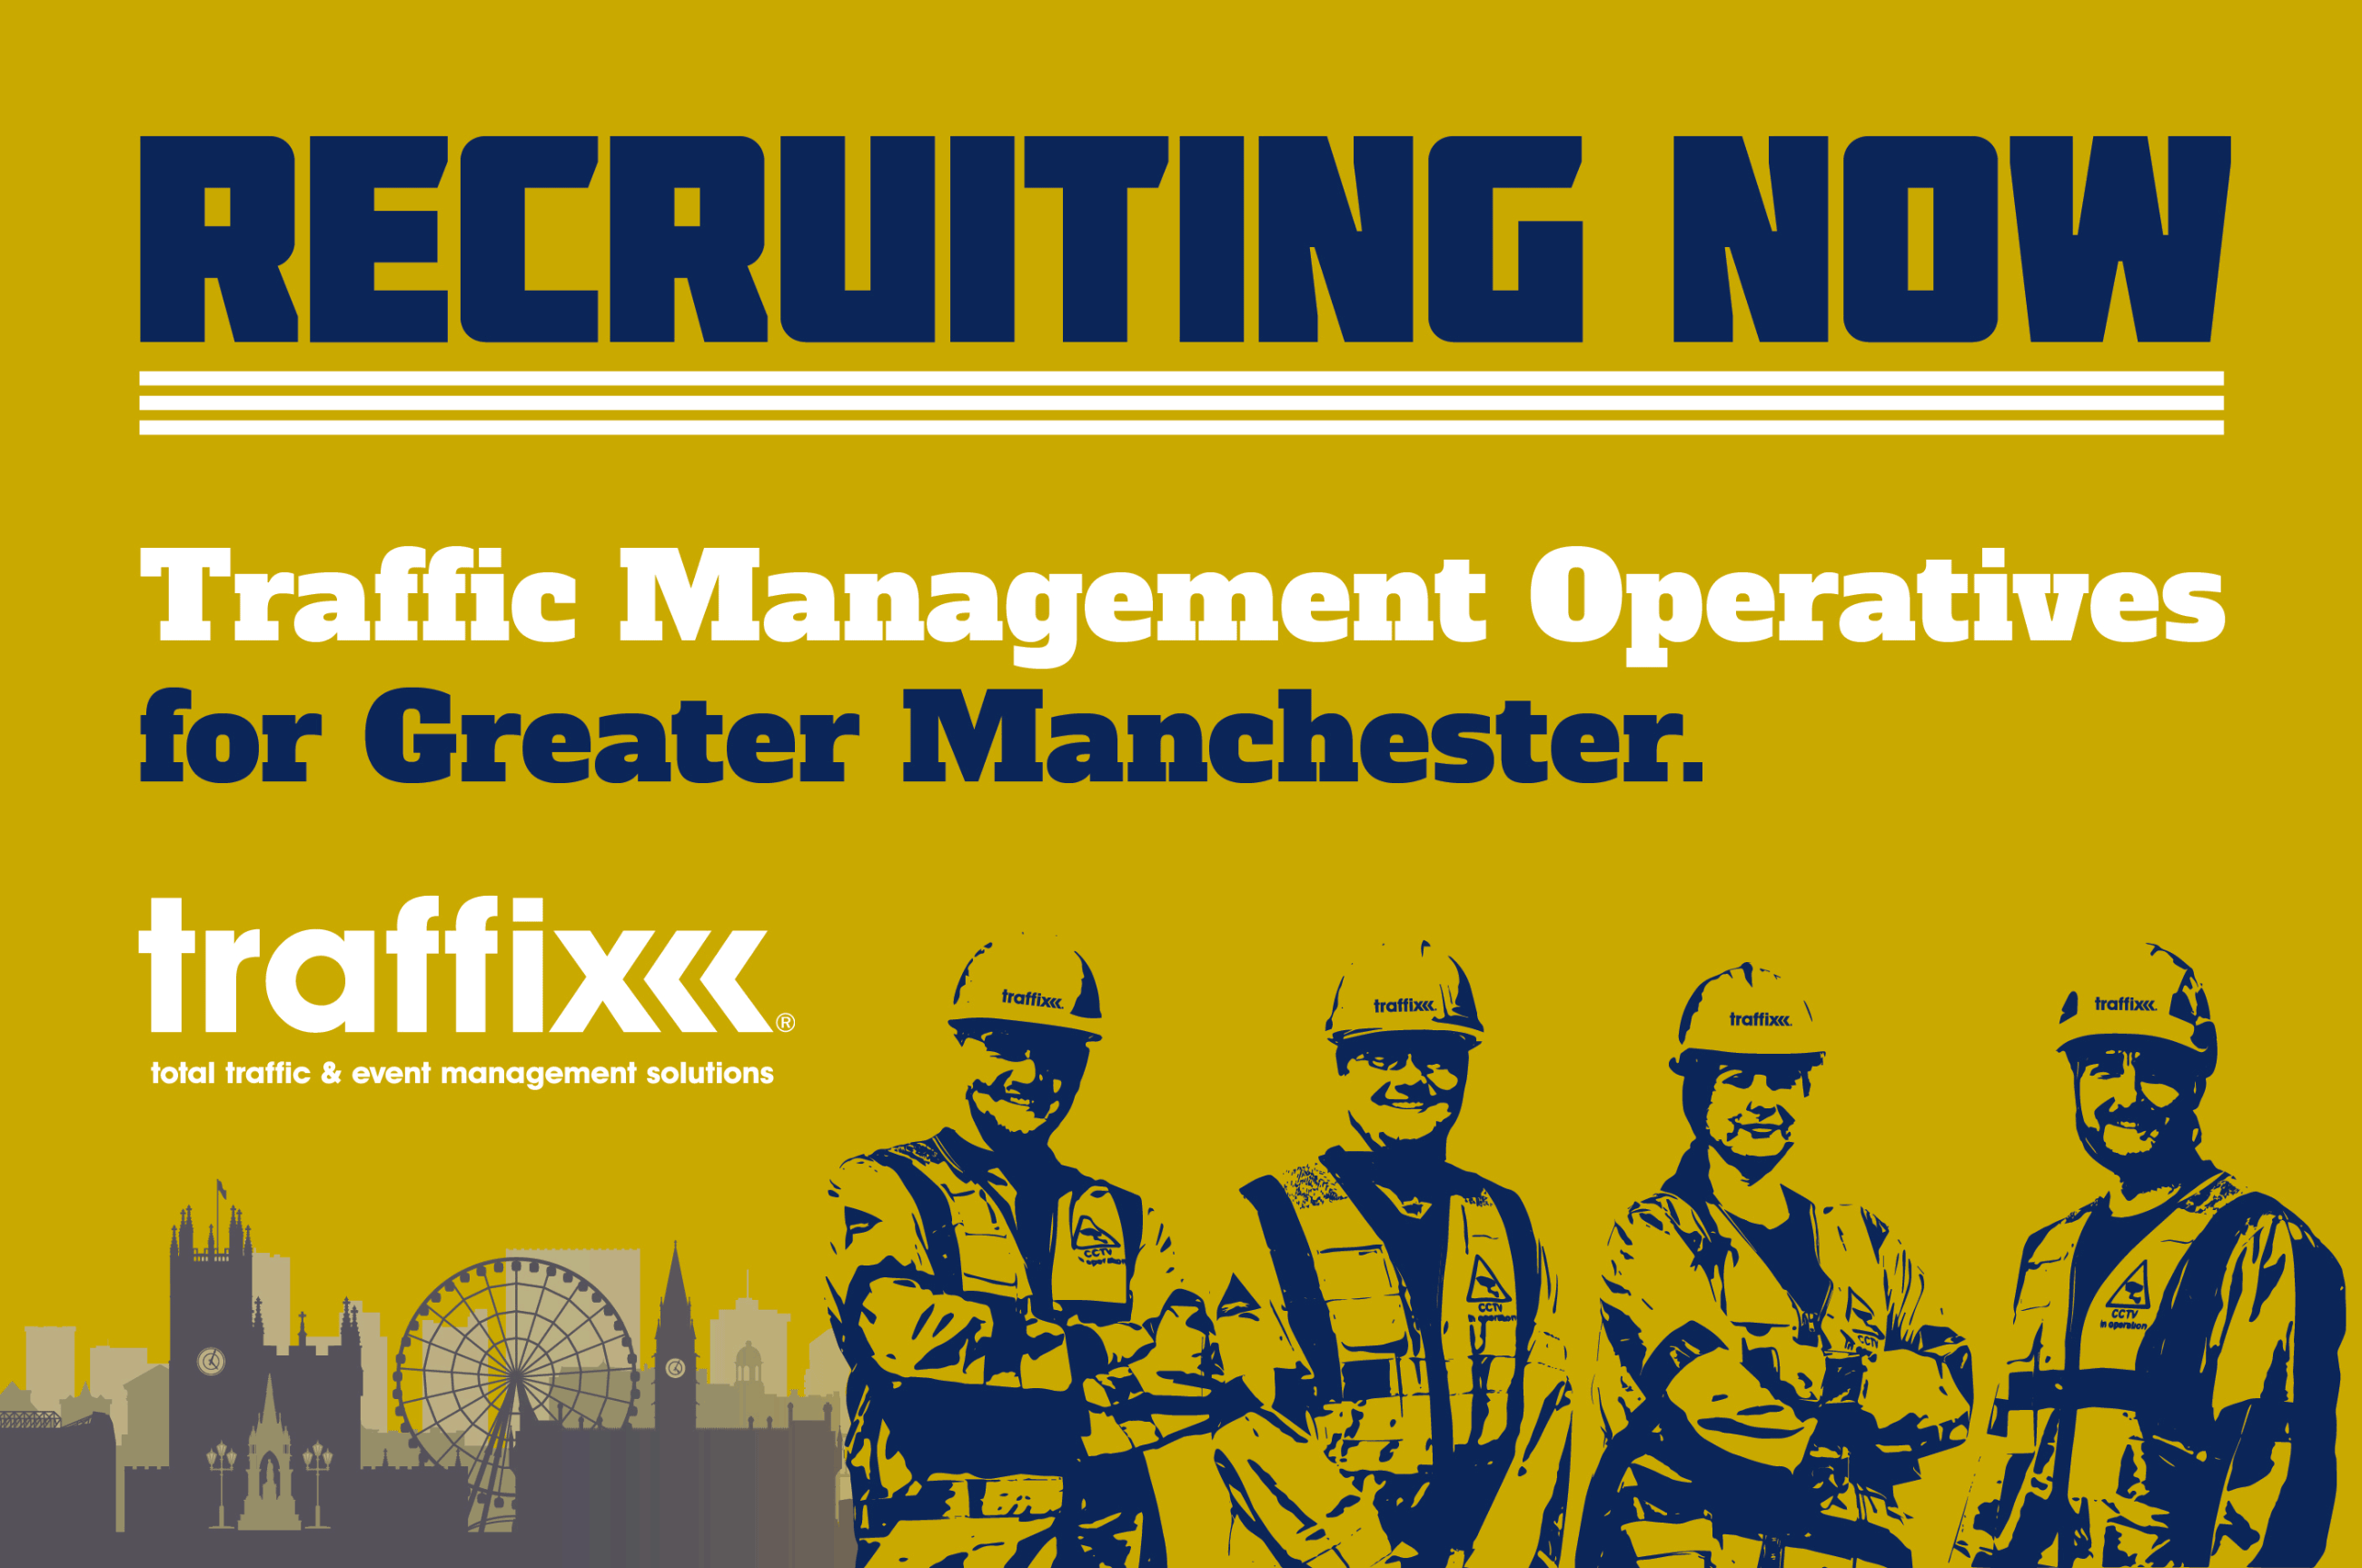 We're recruiting now for Traffic Management Operatives in Greater Manchester